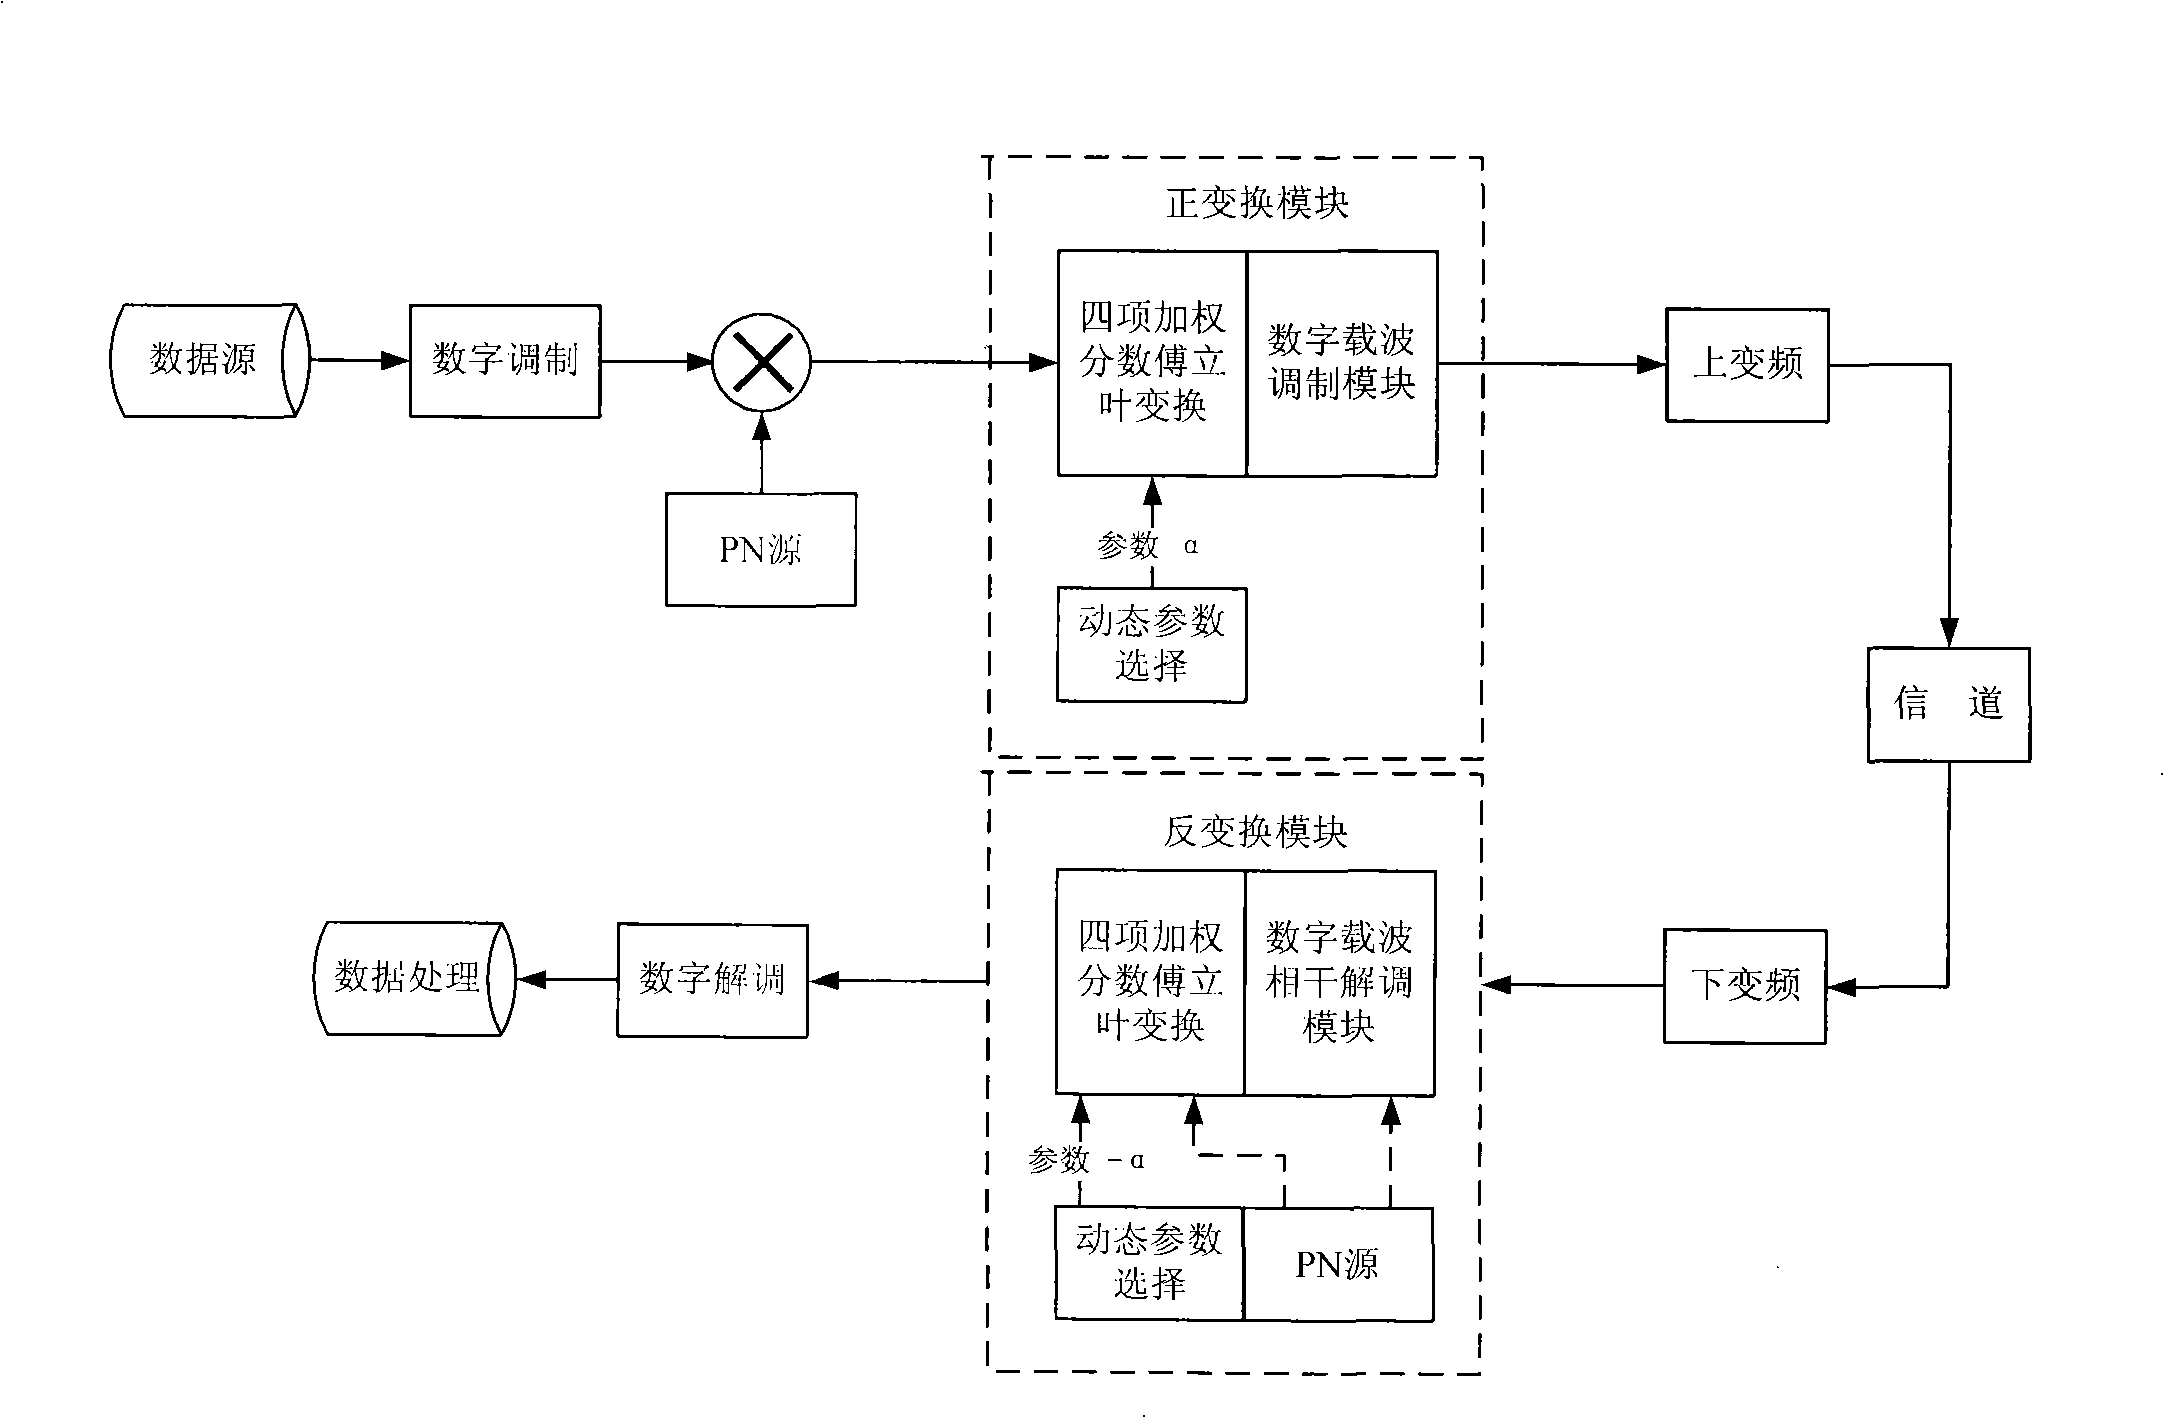 Transmission method for lowering interference between code sequences and code sequence multiplexing in CDMA system